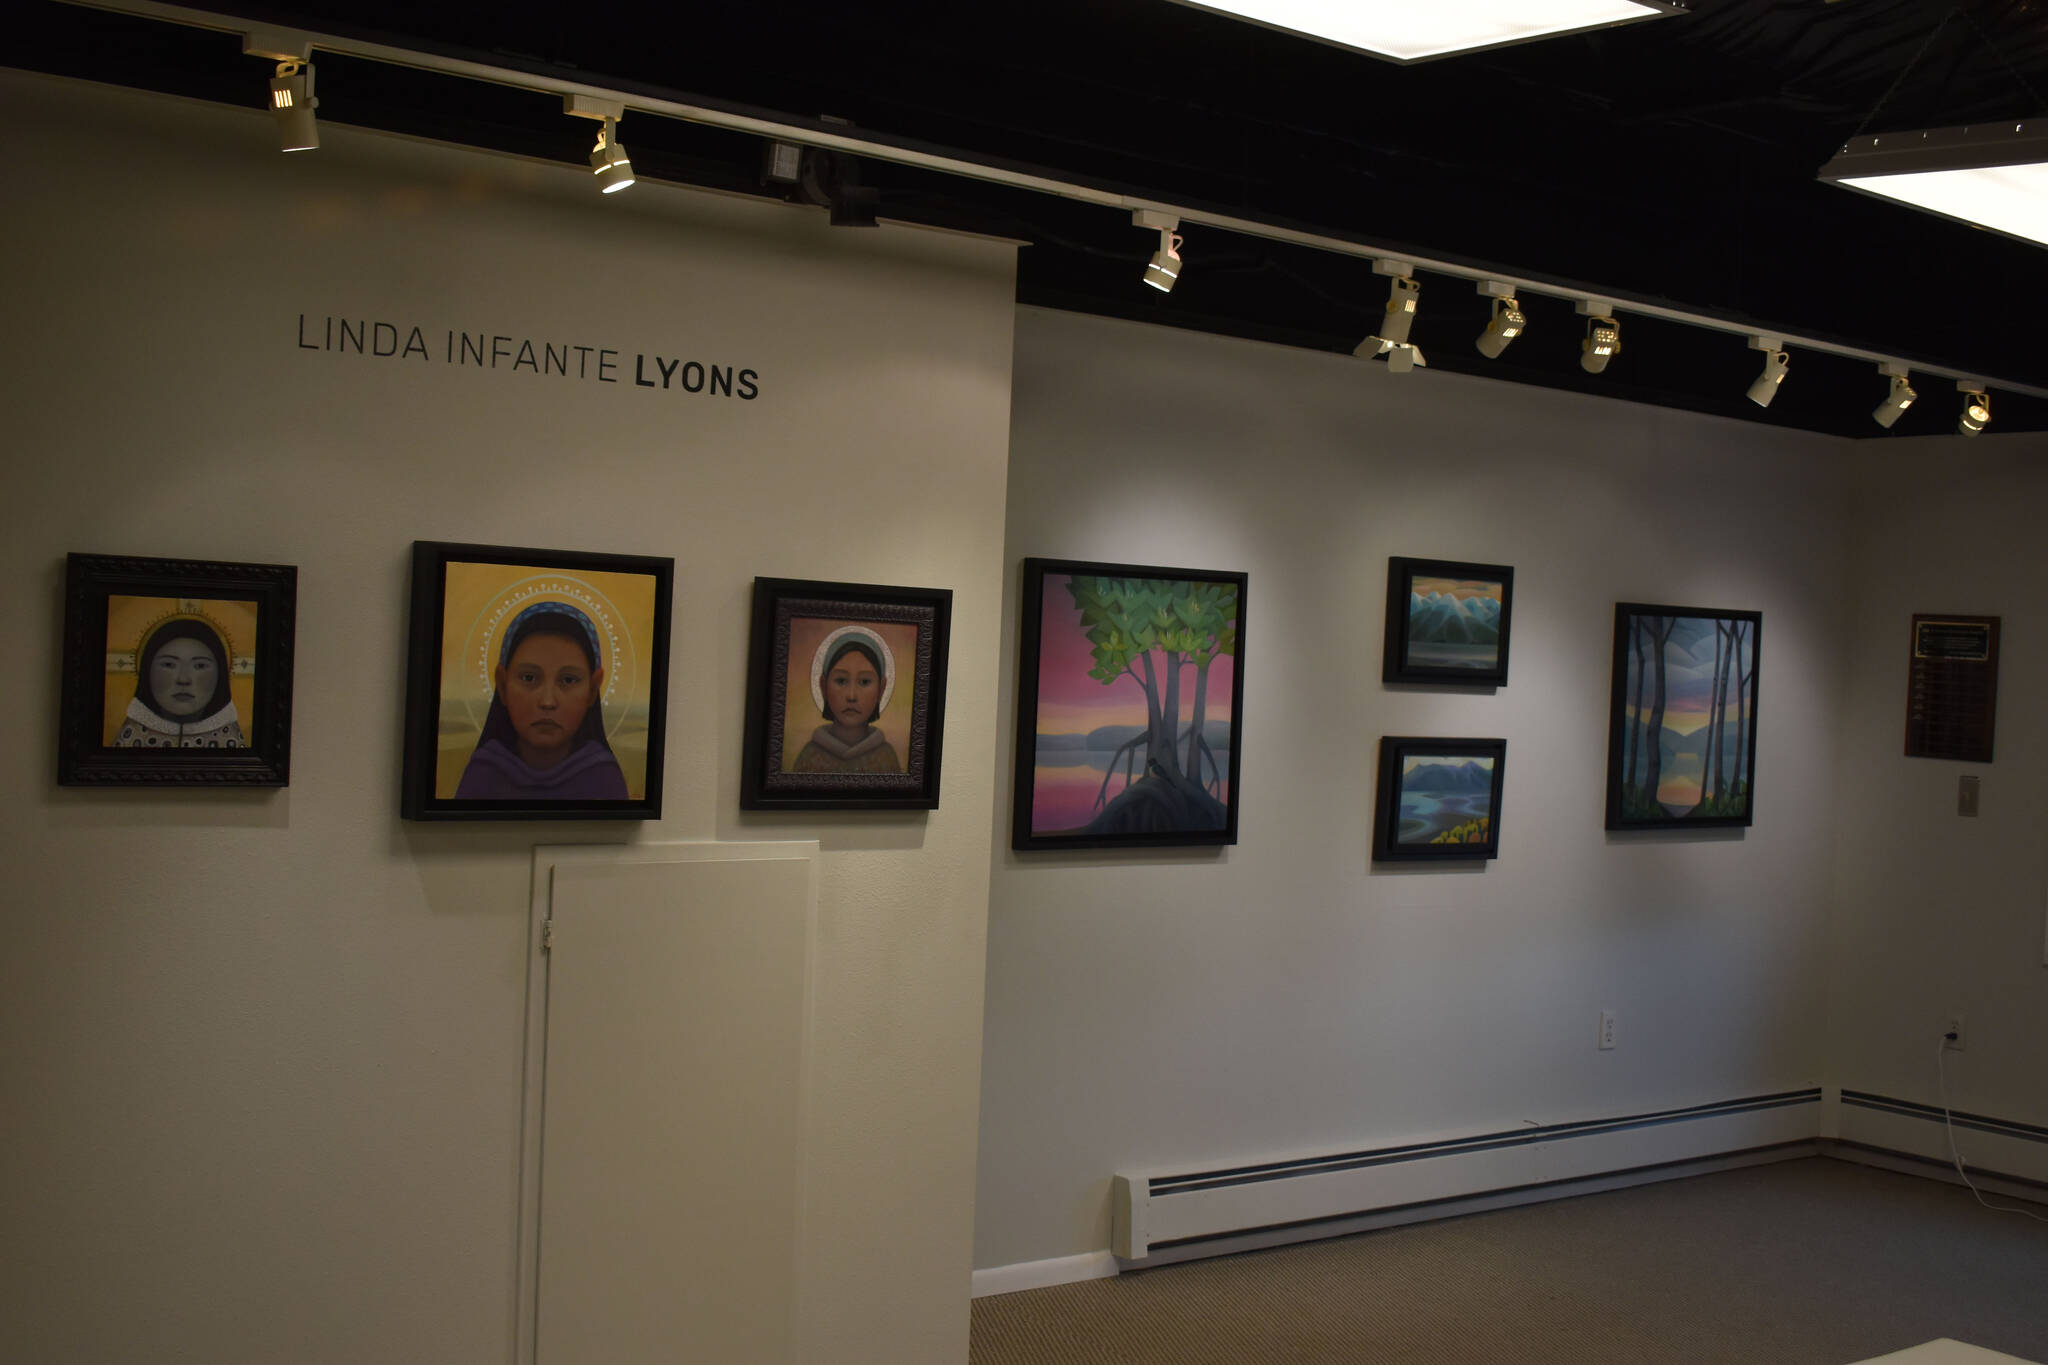 Artwork by Linda Infante Lyons hangs at the Kenai Art Center in Kenai, Alaska on Tuesday, Aug. 2, 2022. This art is part of the Sites Unseen exhiition. (Jake Dye/Peninsula Clarion)